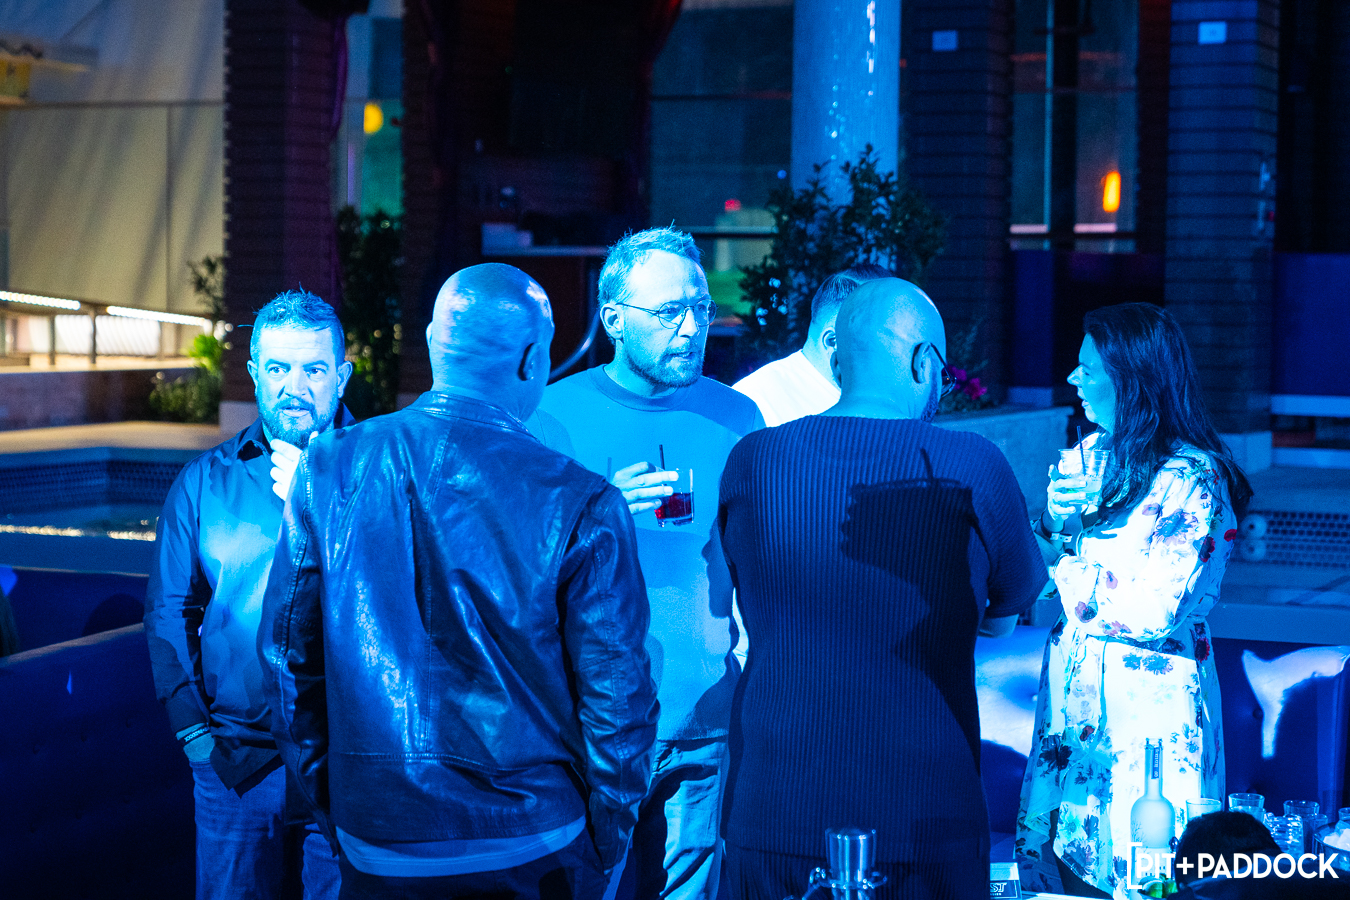 SEMA Clubhouse Turns A Vegas Nightclub Into An Industry Rooftop Reunion